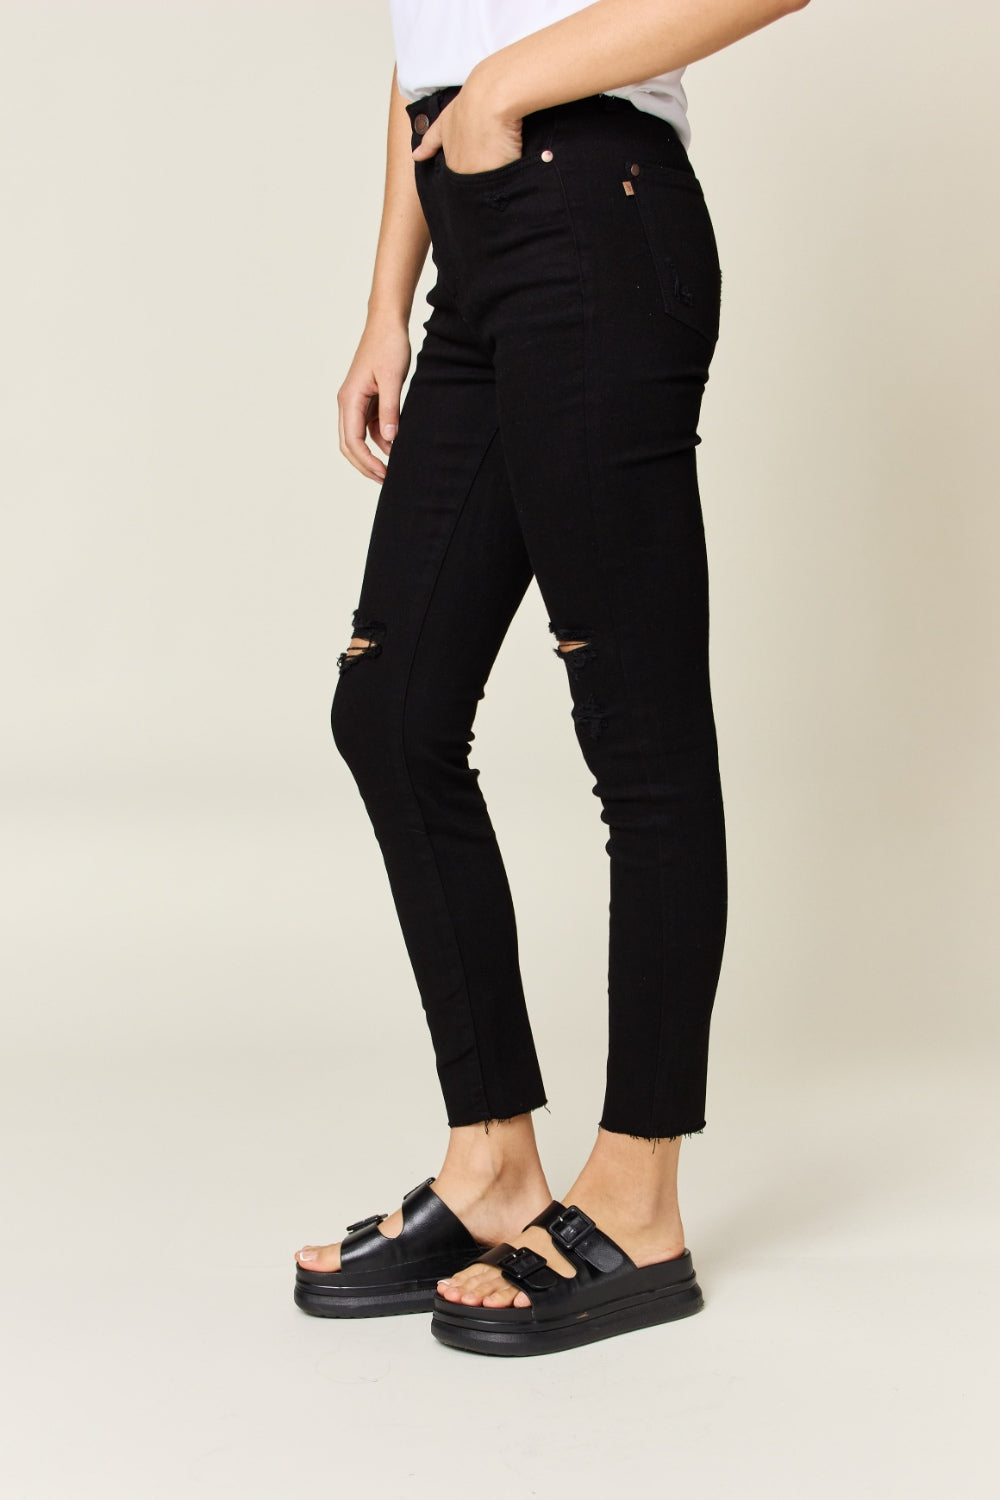 Judy Blue High-Waist Distressed Ankle Skinny Jeans